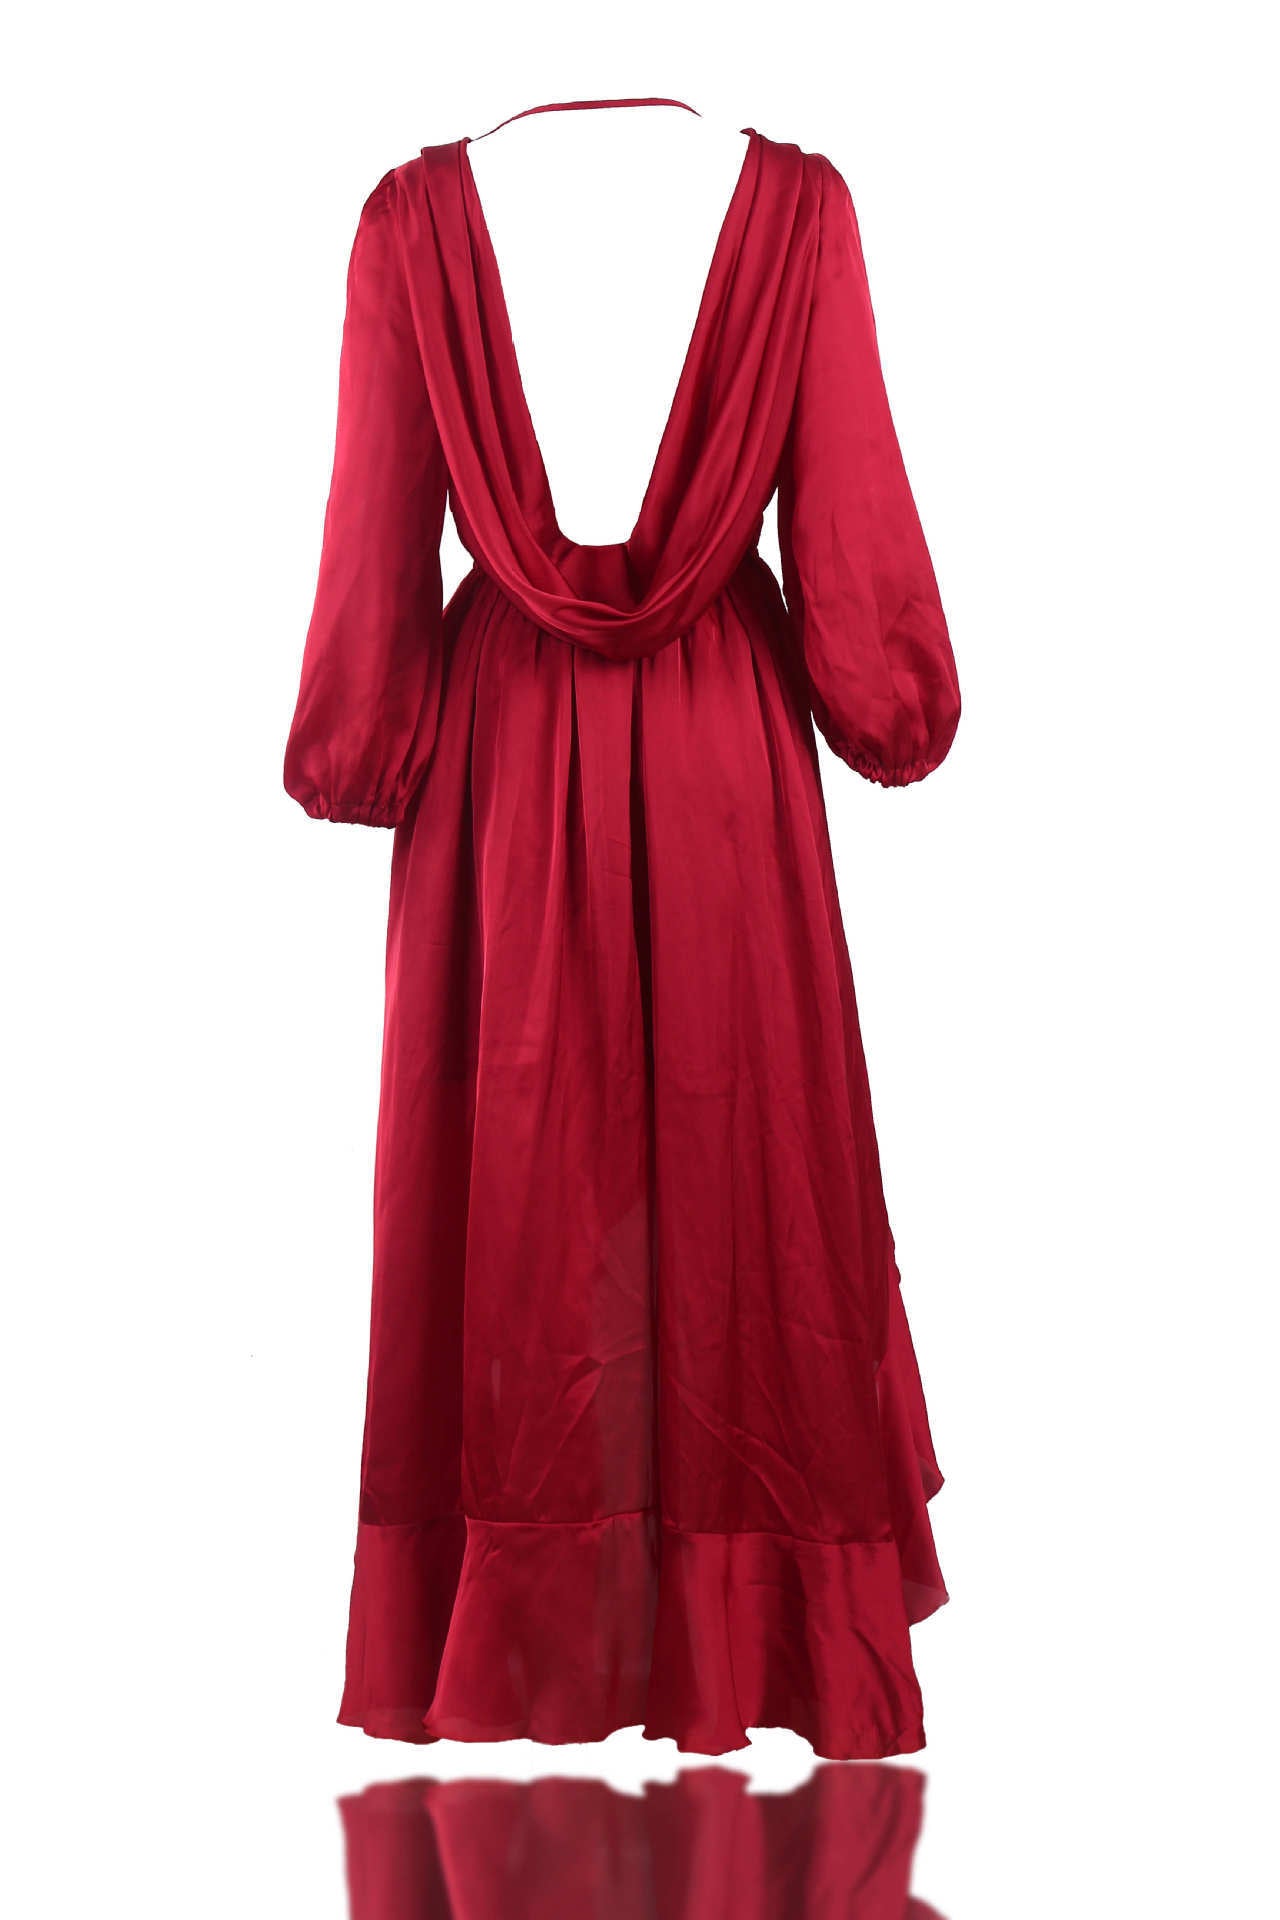 Wine Red Summer Long Beach Holiday Dresses-Dresses-Wine Red-S-Free Shipping Leatheretro